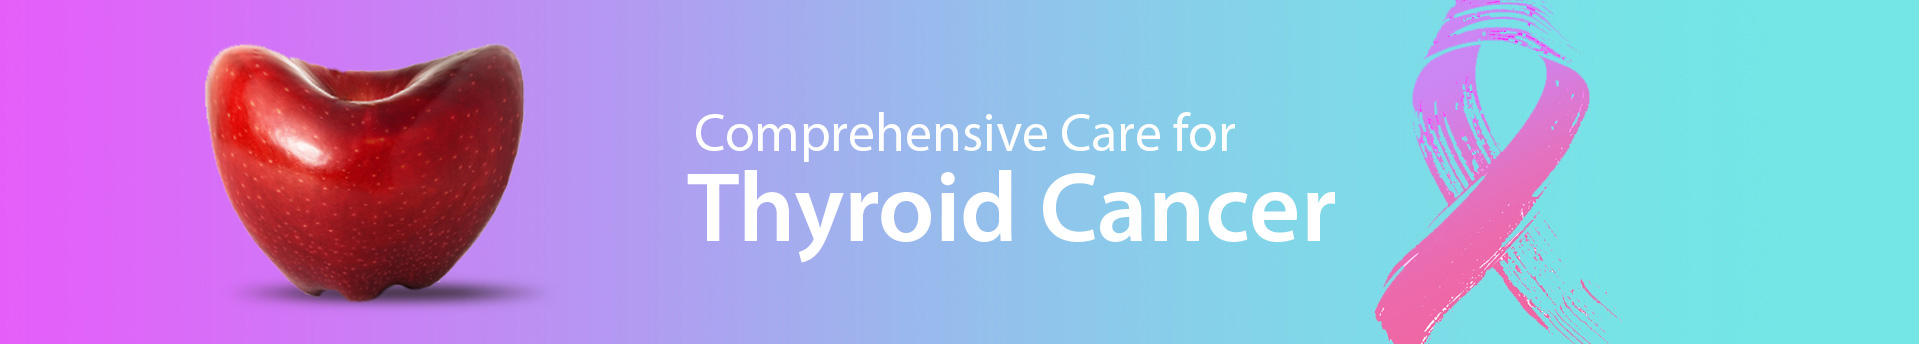 Medicaoncology Thyroid Cancer